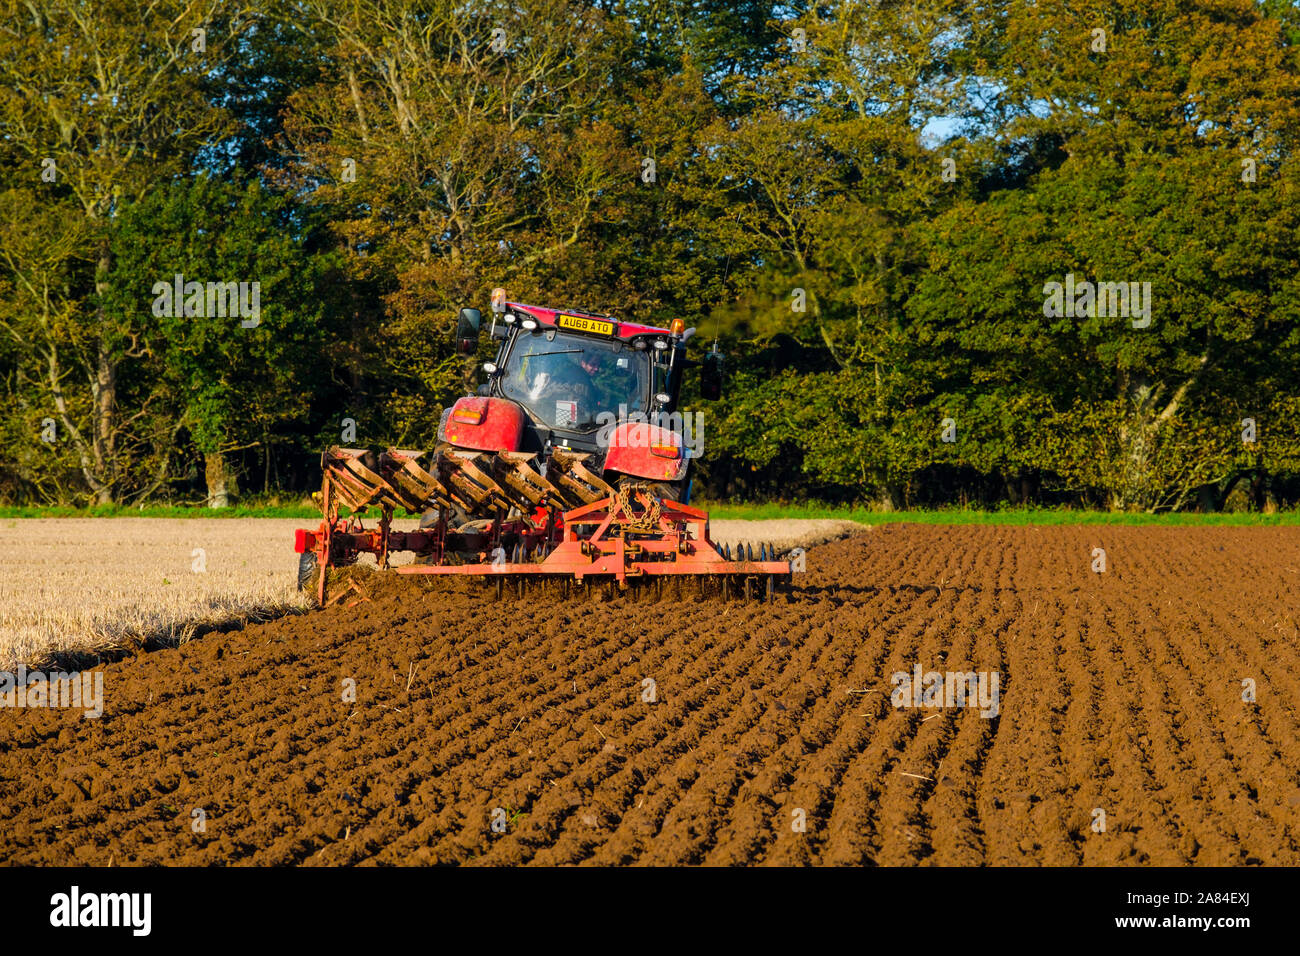 A tractor pulls a plough and press cultivator across a field in autumn ready for seeding. Stock Photo